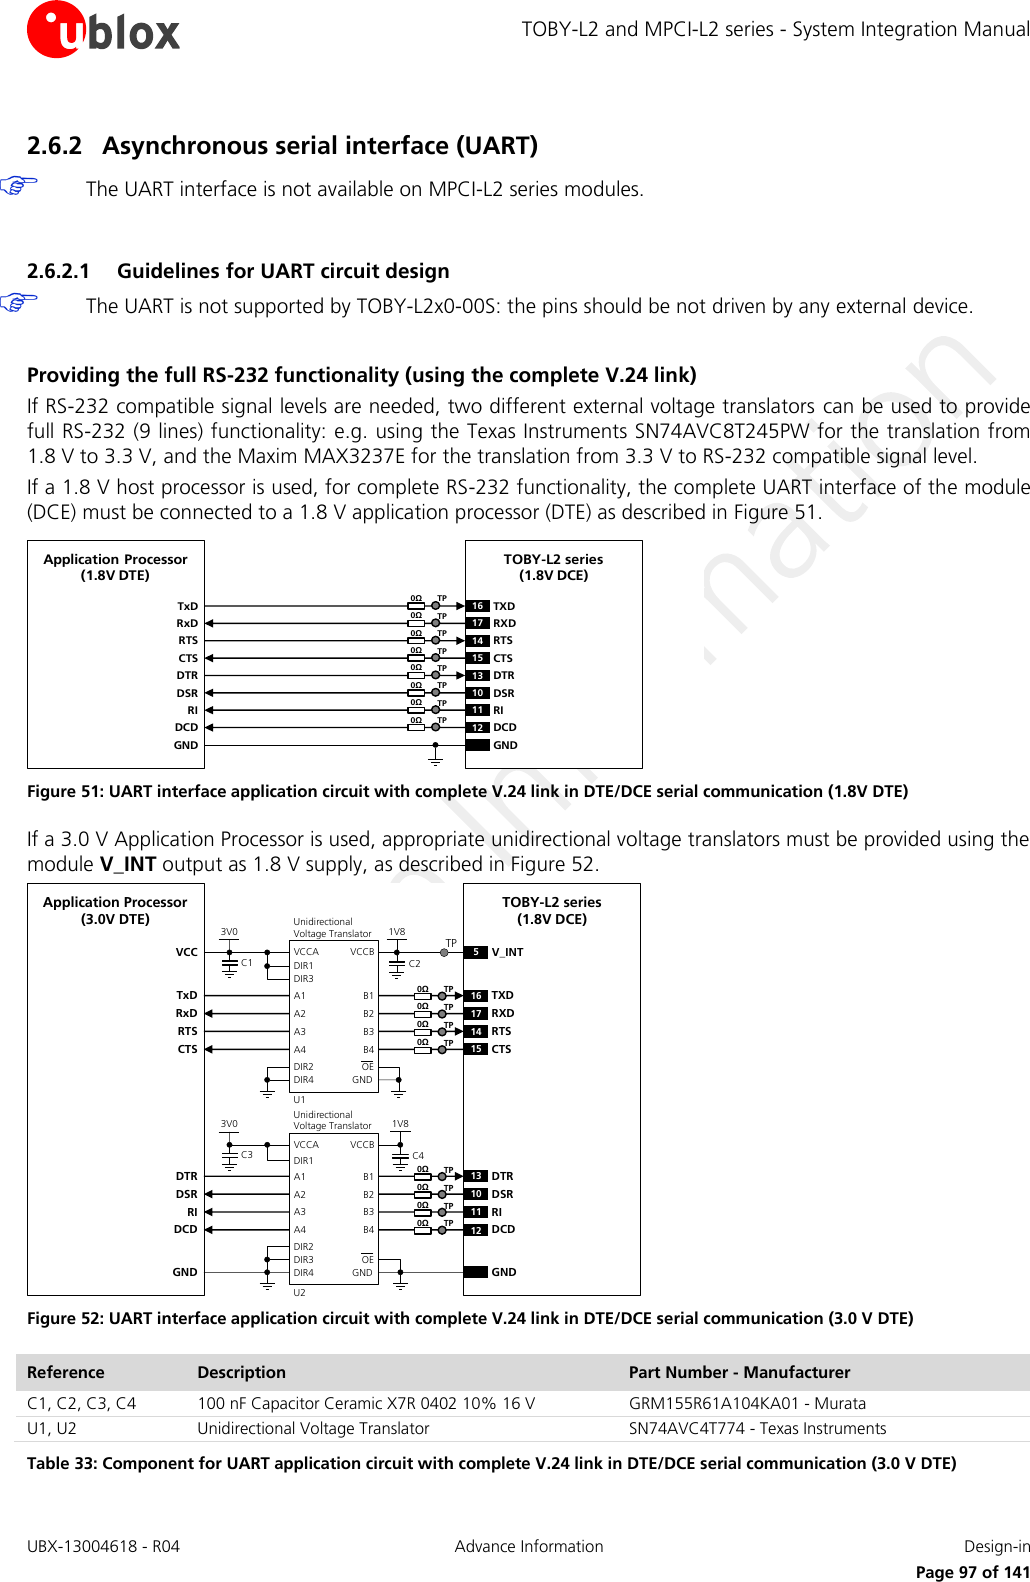 TOBY-L2 and MPCI-L2 series - System Integration Manual UBX-13004618 - R04  Advance Information  Design-in     Page 97 of 141 2.6.2 Asynchronous serial interface (UART)  The UART interface is not available on MPCI-L2 series modules.  2.6.2.1 Guidelines for UART circuit design  The UART is not supported by TOBY-L2x0-00S: the pins should be not driven by any external device.  Providing the full RS-232 functionality (using the complete V.24 link) If RS-232 compatible signal levels are needed, two different external voltage translators  can be used to provide full RS-232 (9 lines) functionality: e.g. using the Texas Instruments SN74AVC8T245PW for the translation from 1.8 V to 3.3 V, and the Maxim MAX3237E for the translation from 3.3 V to RS-232 compatible signal level. If a 1.8 V host processor is used, for complete RS-232 functionality, the complete UART interface of the module (DCE) must be connected to a 1.8 V application processor (DTE) as described in Figure 51. TxDApplication Processor(1.8V DTE)RxDRTSCTSDTRDSRRIDCDGNDTOBY-L2 series (1.8V DCE)16 TXD13 DTR17 RXD14 RTS15 CTS10 DSR11 RI12 DCDGND0ΩTP0ΩTP0ΩTP0ΩTP0ΩTP0ΩTP0ΩTP0ΩTP Figure 51: UART interface application circuit with complete V.24 link in DTE/DCE serial communication (1.8V DTE) If a 3.0 V Application Processor is used, appropriate unidirectional voltage translators must be provided using the module V_INT output as 1.8 V supply, as described in Figure 52. 5V_INTTxDApplication Processor(3.0V DTE)RxDRTSCTSDTRDSRRIDCDGNDTOBY-L2 series (1.8V DCE)16 TXD13 DTR17 RXD14 RTS15 CTS10 DSR11 RI12 DCDGND1V8B1 A1GNDU1B3A3VCCBVCCAUnidirectionalVoltage TranslatorC1 C23V0DIR3DIR2 OEDIR1VCCB2 A2B4A4DIR41V8B1 A1GNDU2B3A3VCCBVCCAUnidirectionalVoltage TranslatorC3 C43V0DIR1DIR3 OEB2 A2B4A4DIR4DIR2TP0ΩTP0ΩTP0ΩTP0ΩTP0ΩTP0ΩTP0ΩTP0ΩTP Figure 52: UART interface application circuit with complete V.24 link in DTE/DCE serial communication (3.0 V DTE) Reference Description Part Number - Manufacturer C1, C2, C3, C4 100 nF Capacitor Ceramic X7R 0402 10% 16 V GRM155R61A104KA01 - Murata U1, U2 Unidirectional Voltage Translator SN74AVC4T774 - Texas Instruments Table 33: Component for UART application circuit with complete V.24 link in DTE/DCE serial communication (3.0 V DTE) 